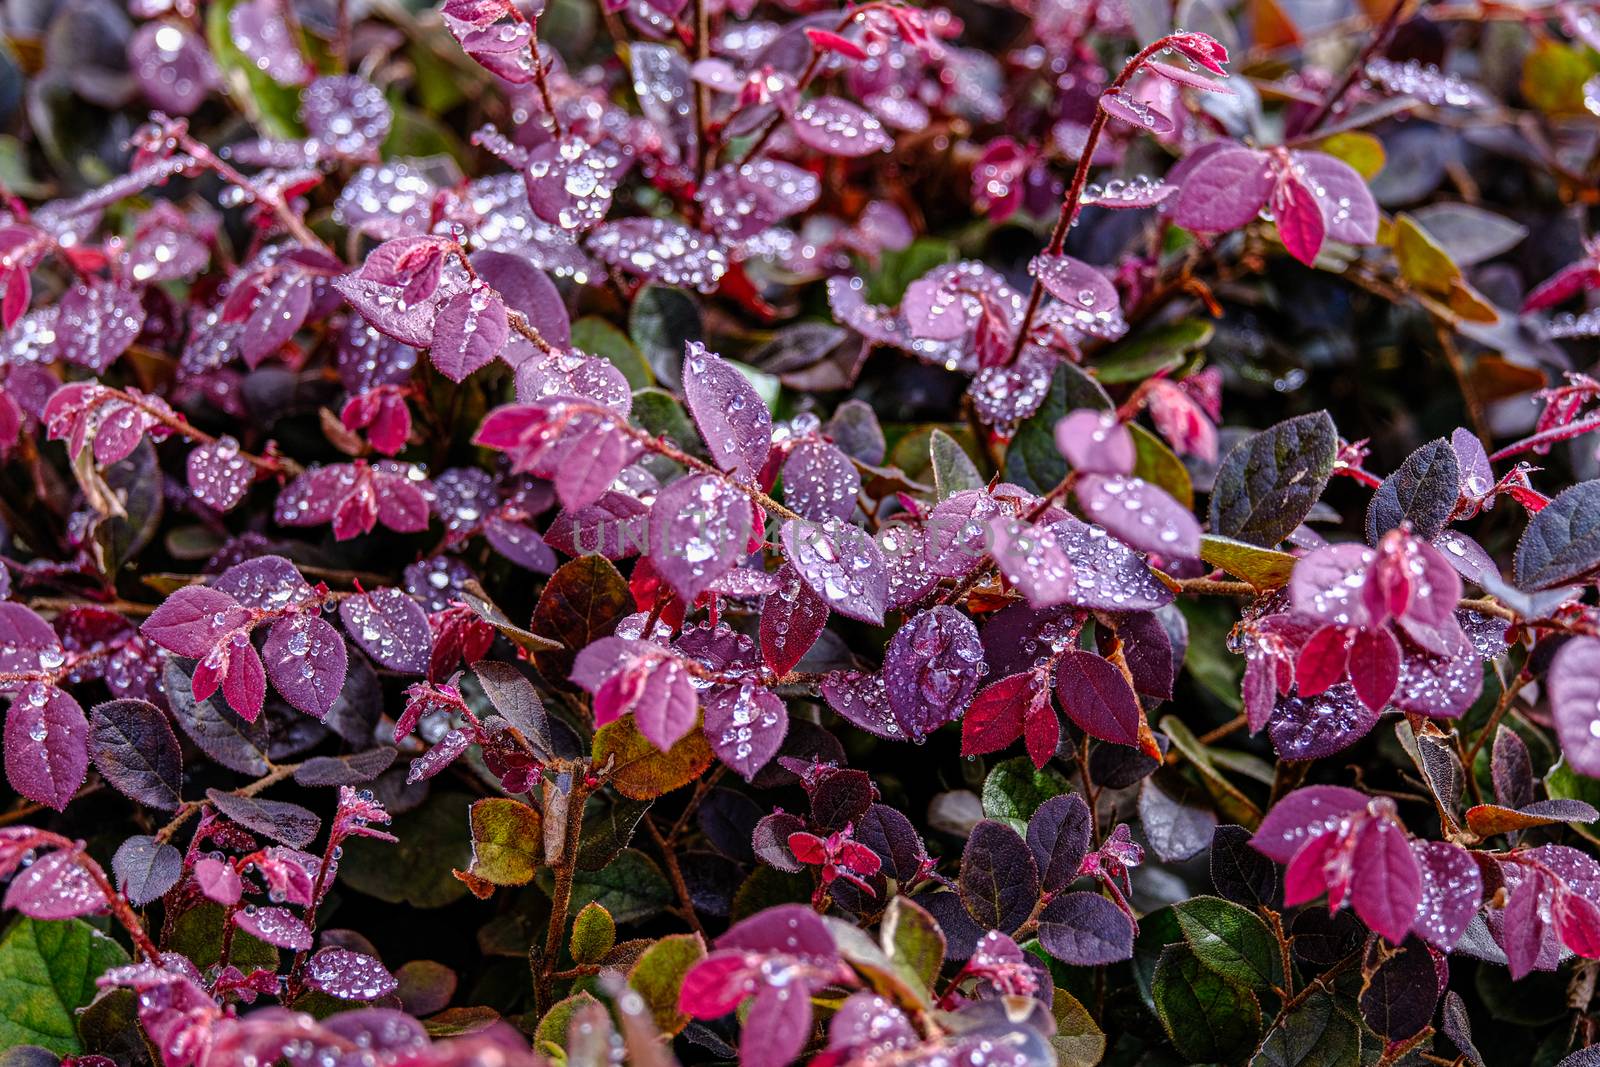 Water Drops on Red Leaves by dbvirago